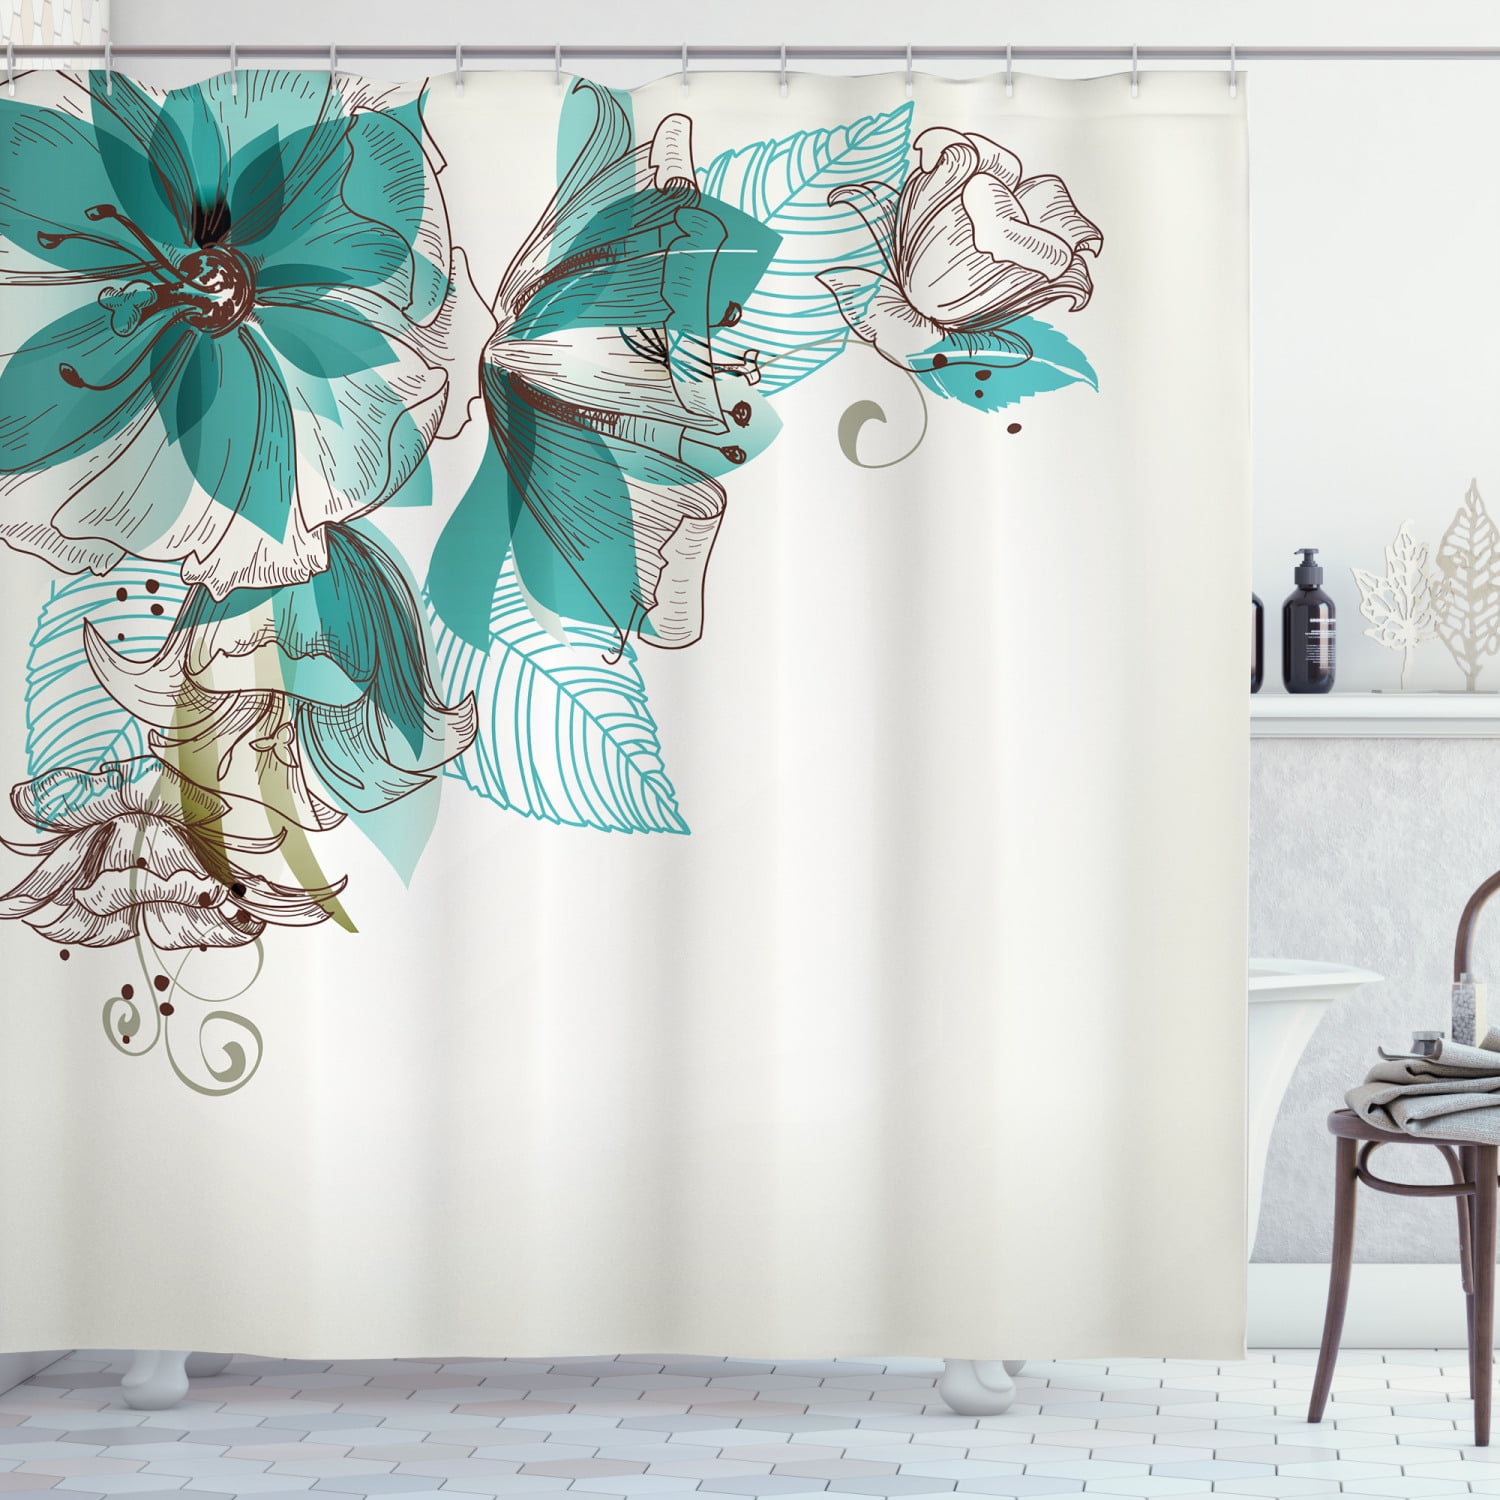 Details about   Modern Shower Curtain Wild Forest Leaf Flowers Print for Bathroom 